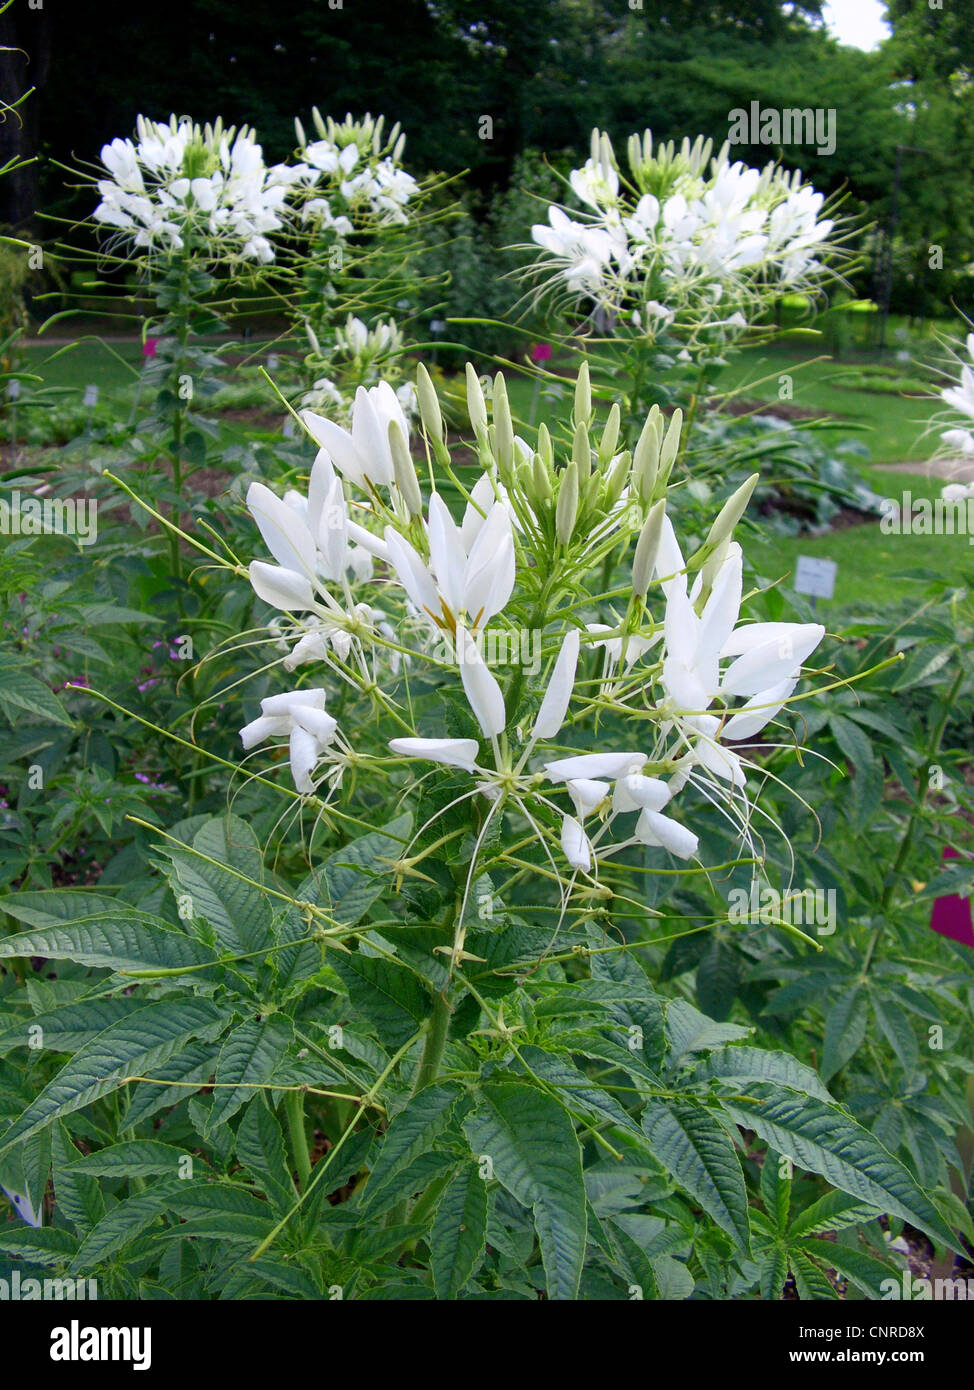 Spider flower (Cleome trachysperma), blooming Stock Photo